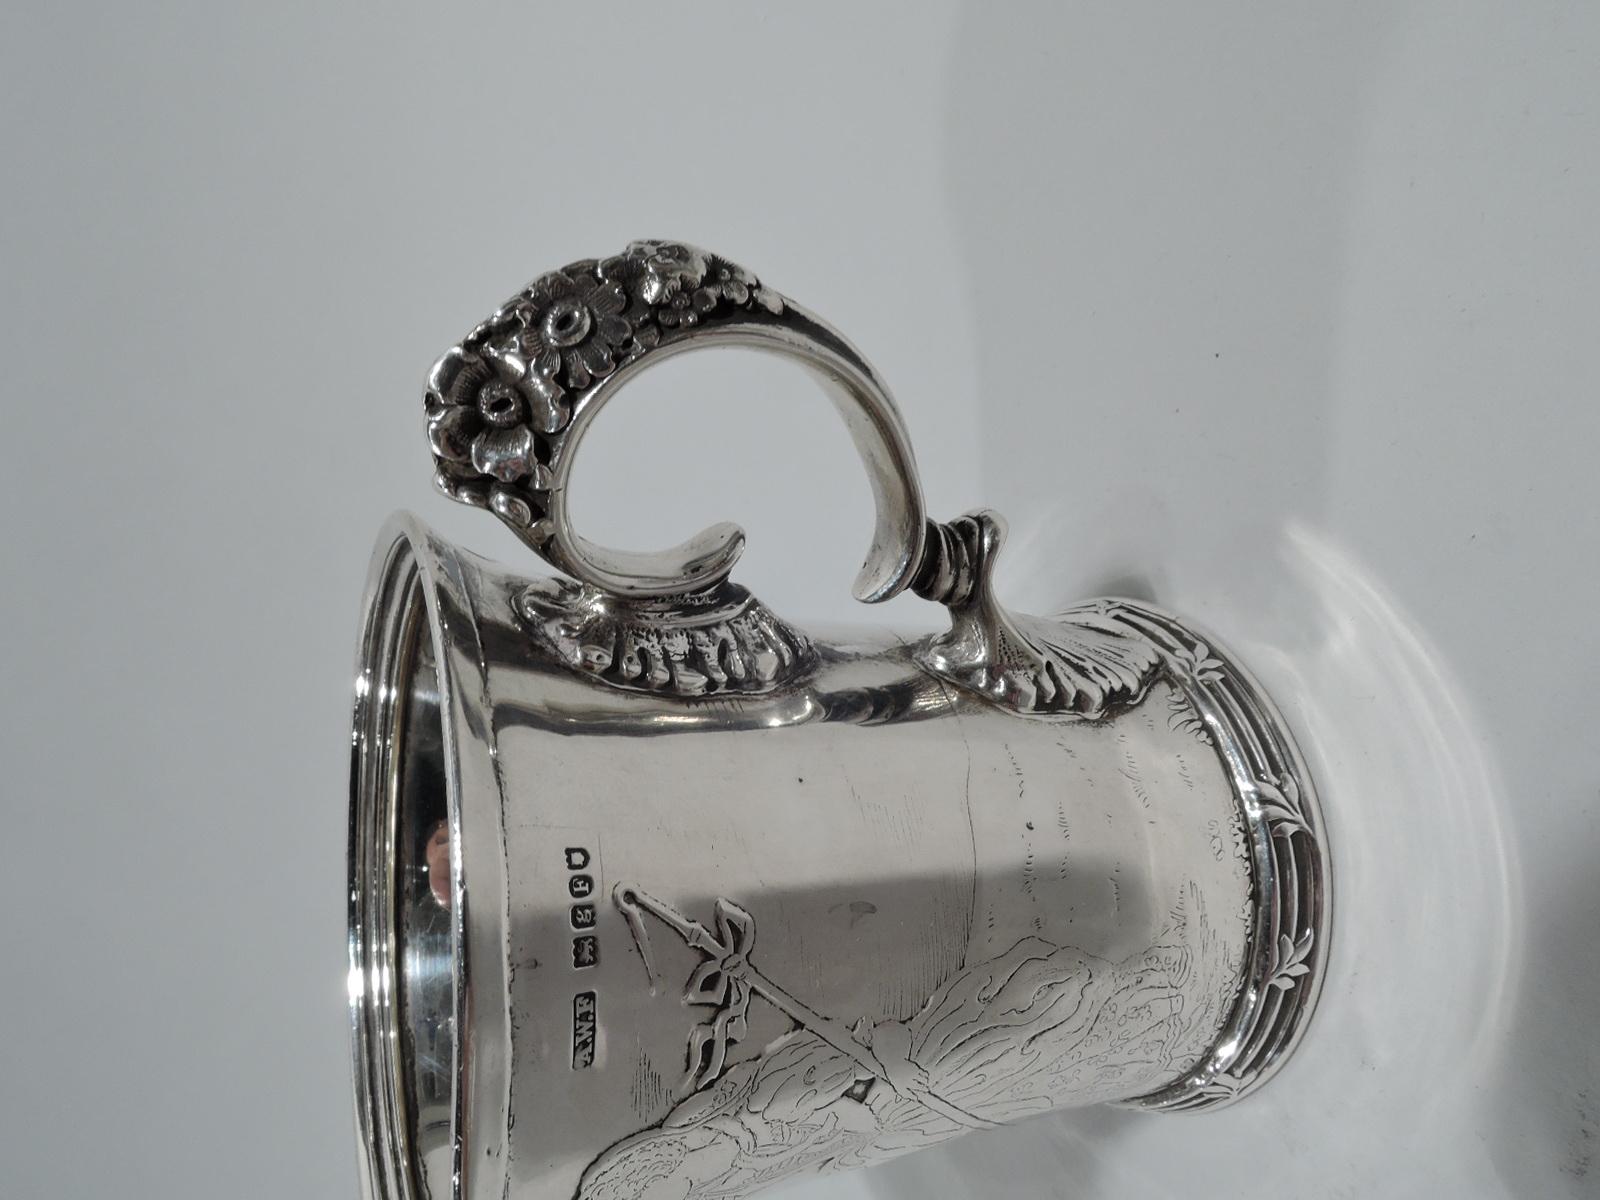 American Antique Tiffany Sterling Silver Little Bo Beep Nursery Rhyme Baby Cup